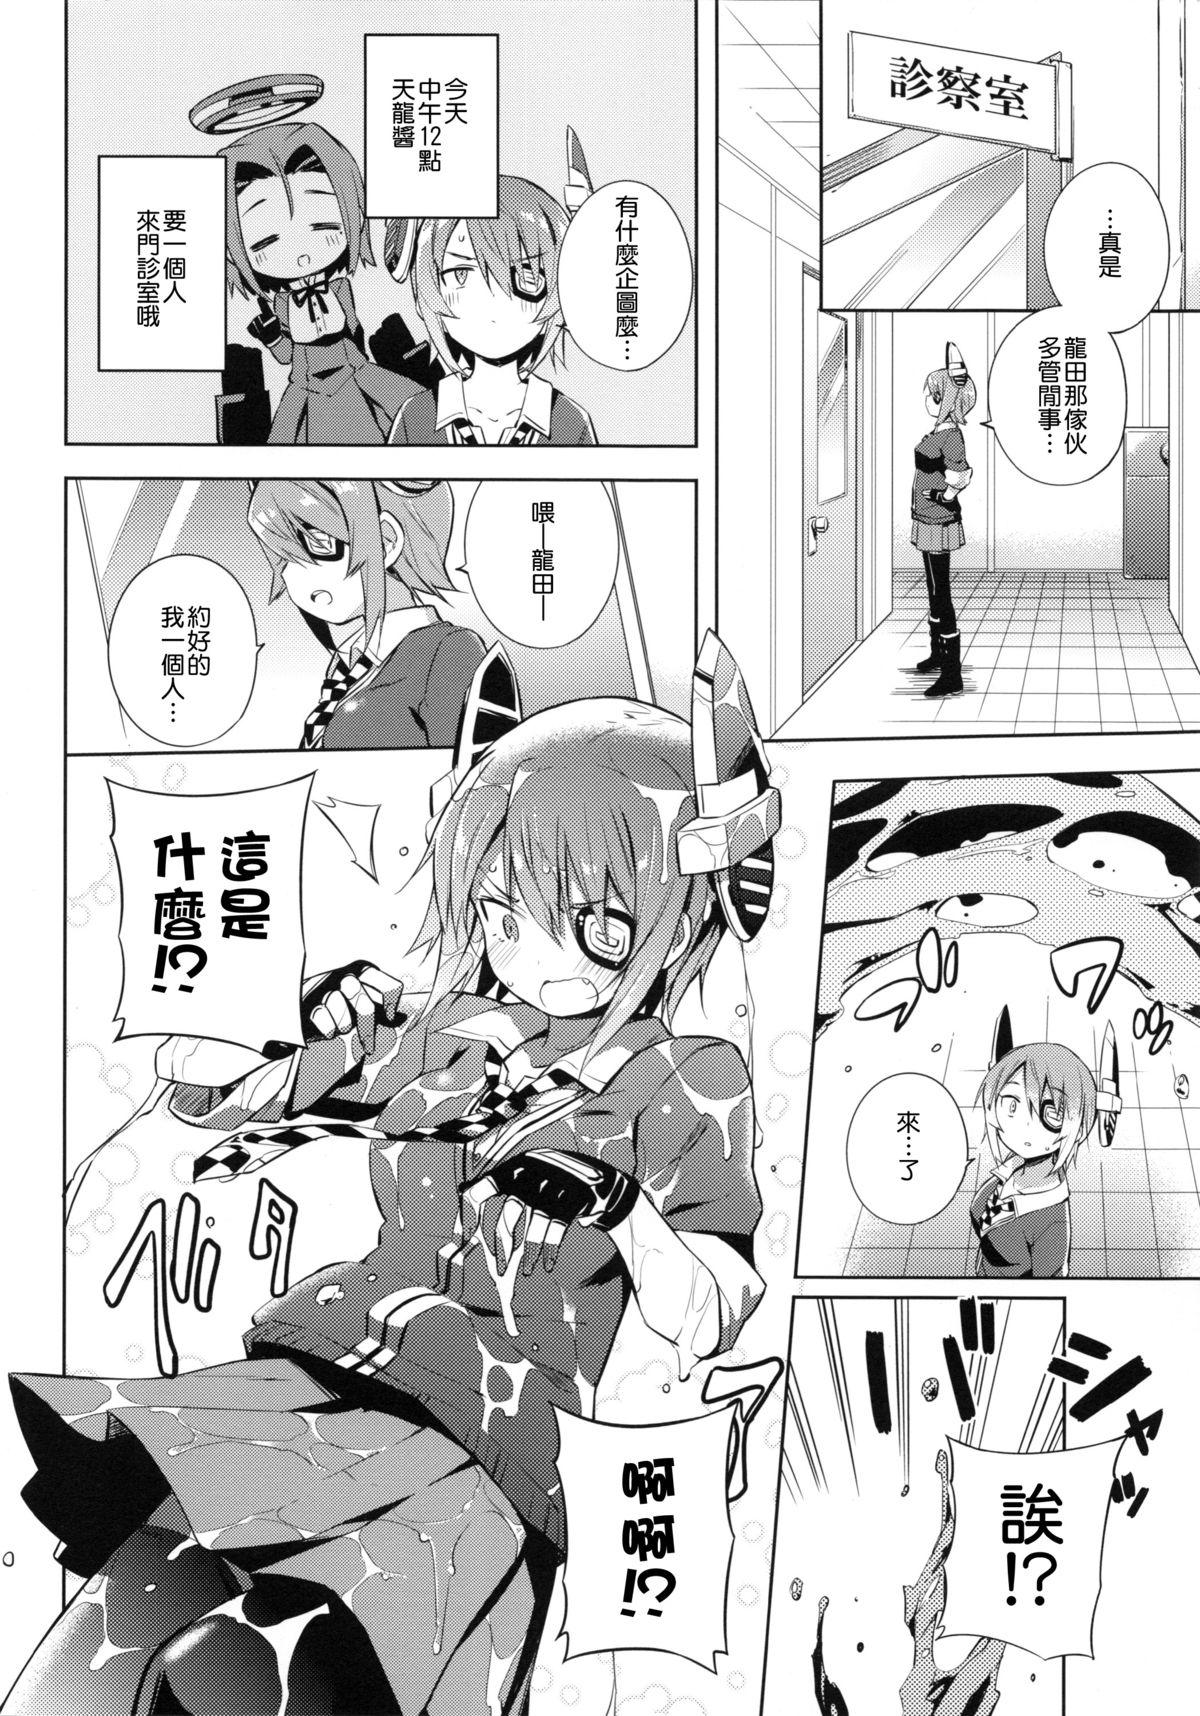 Moaning Tentatukore. - Kantai collection Highschool - Page 8